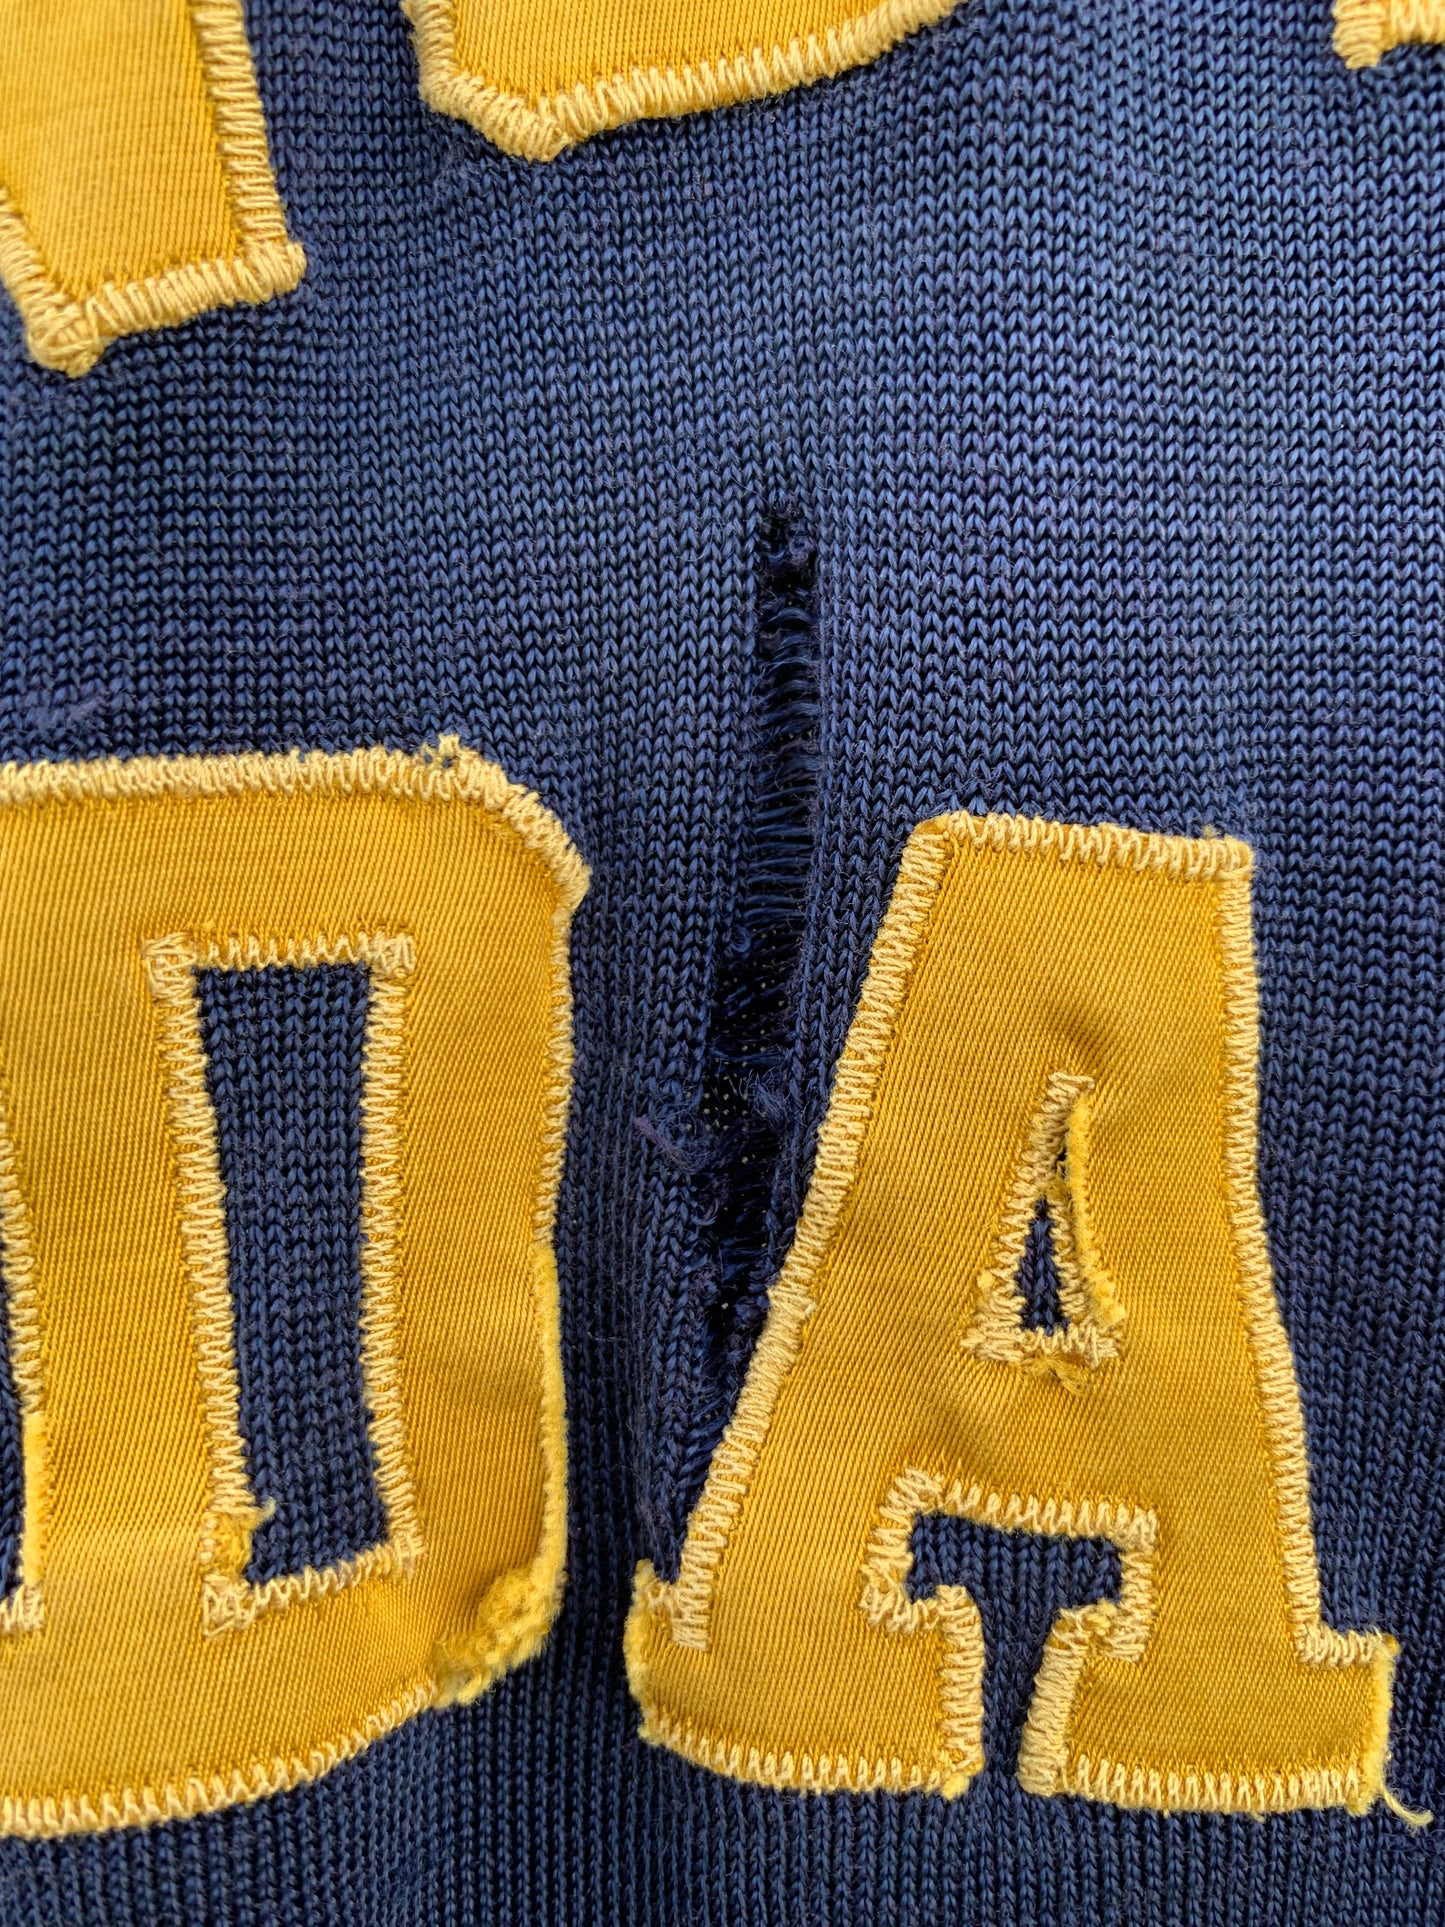 1960s Notre Dame Jersey (M)